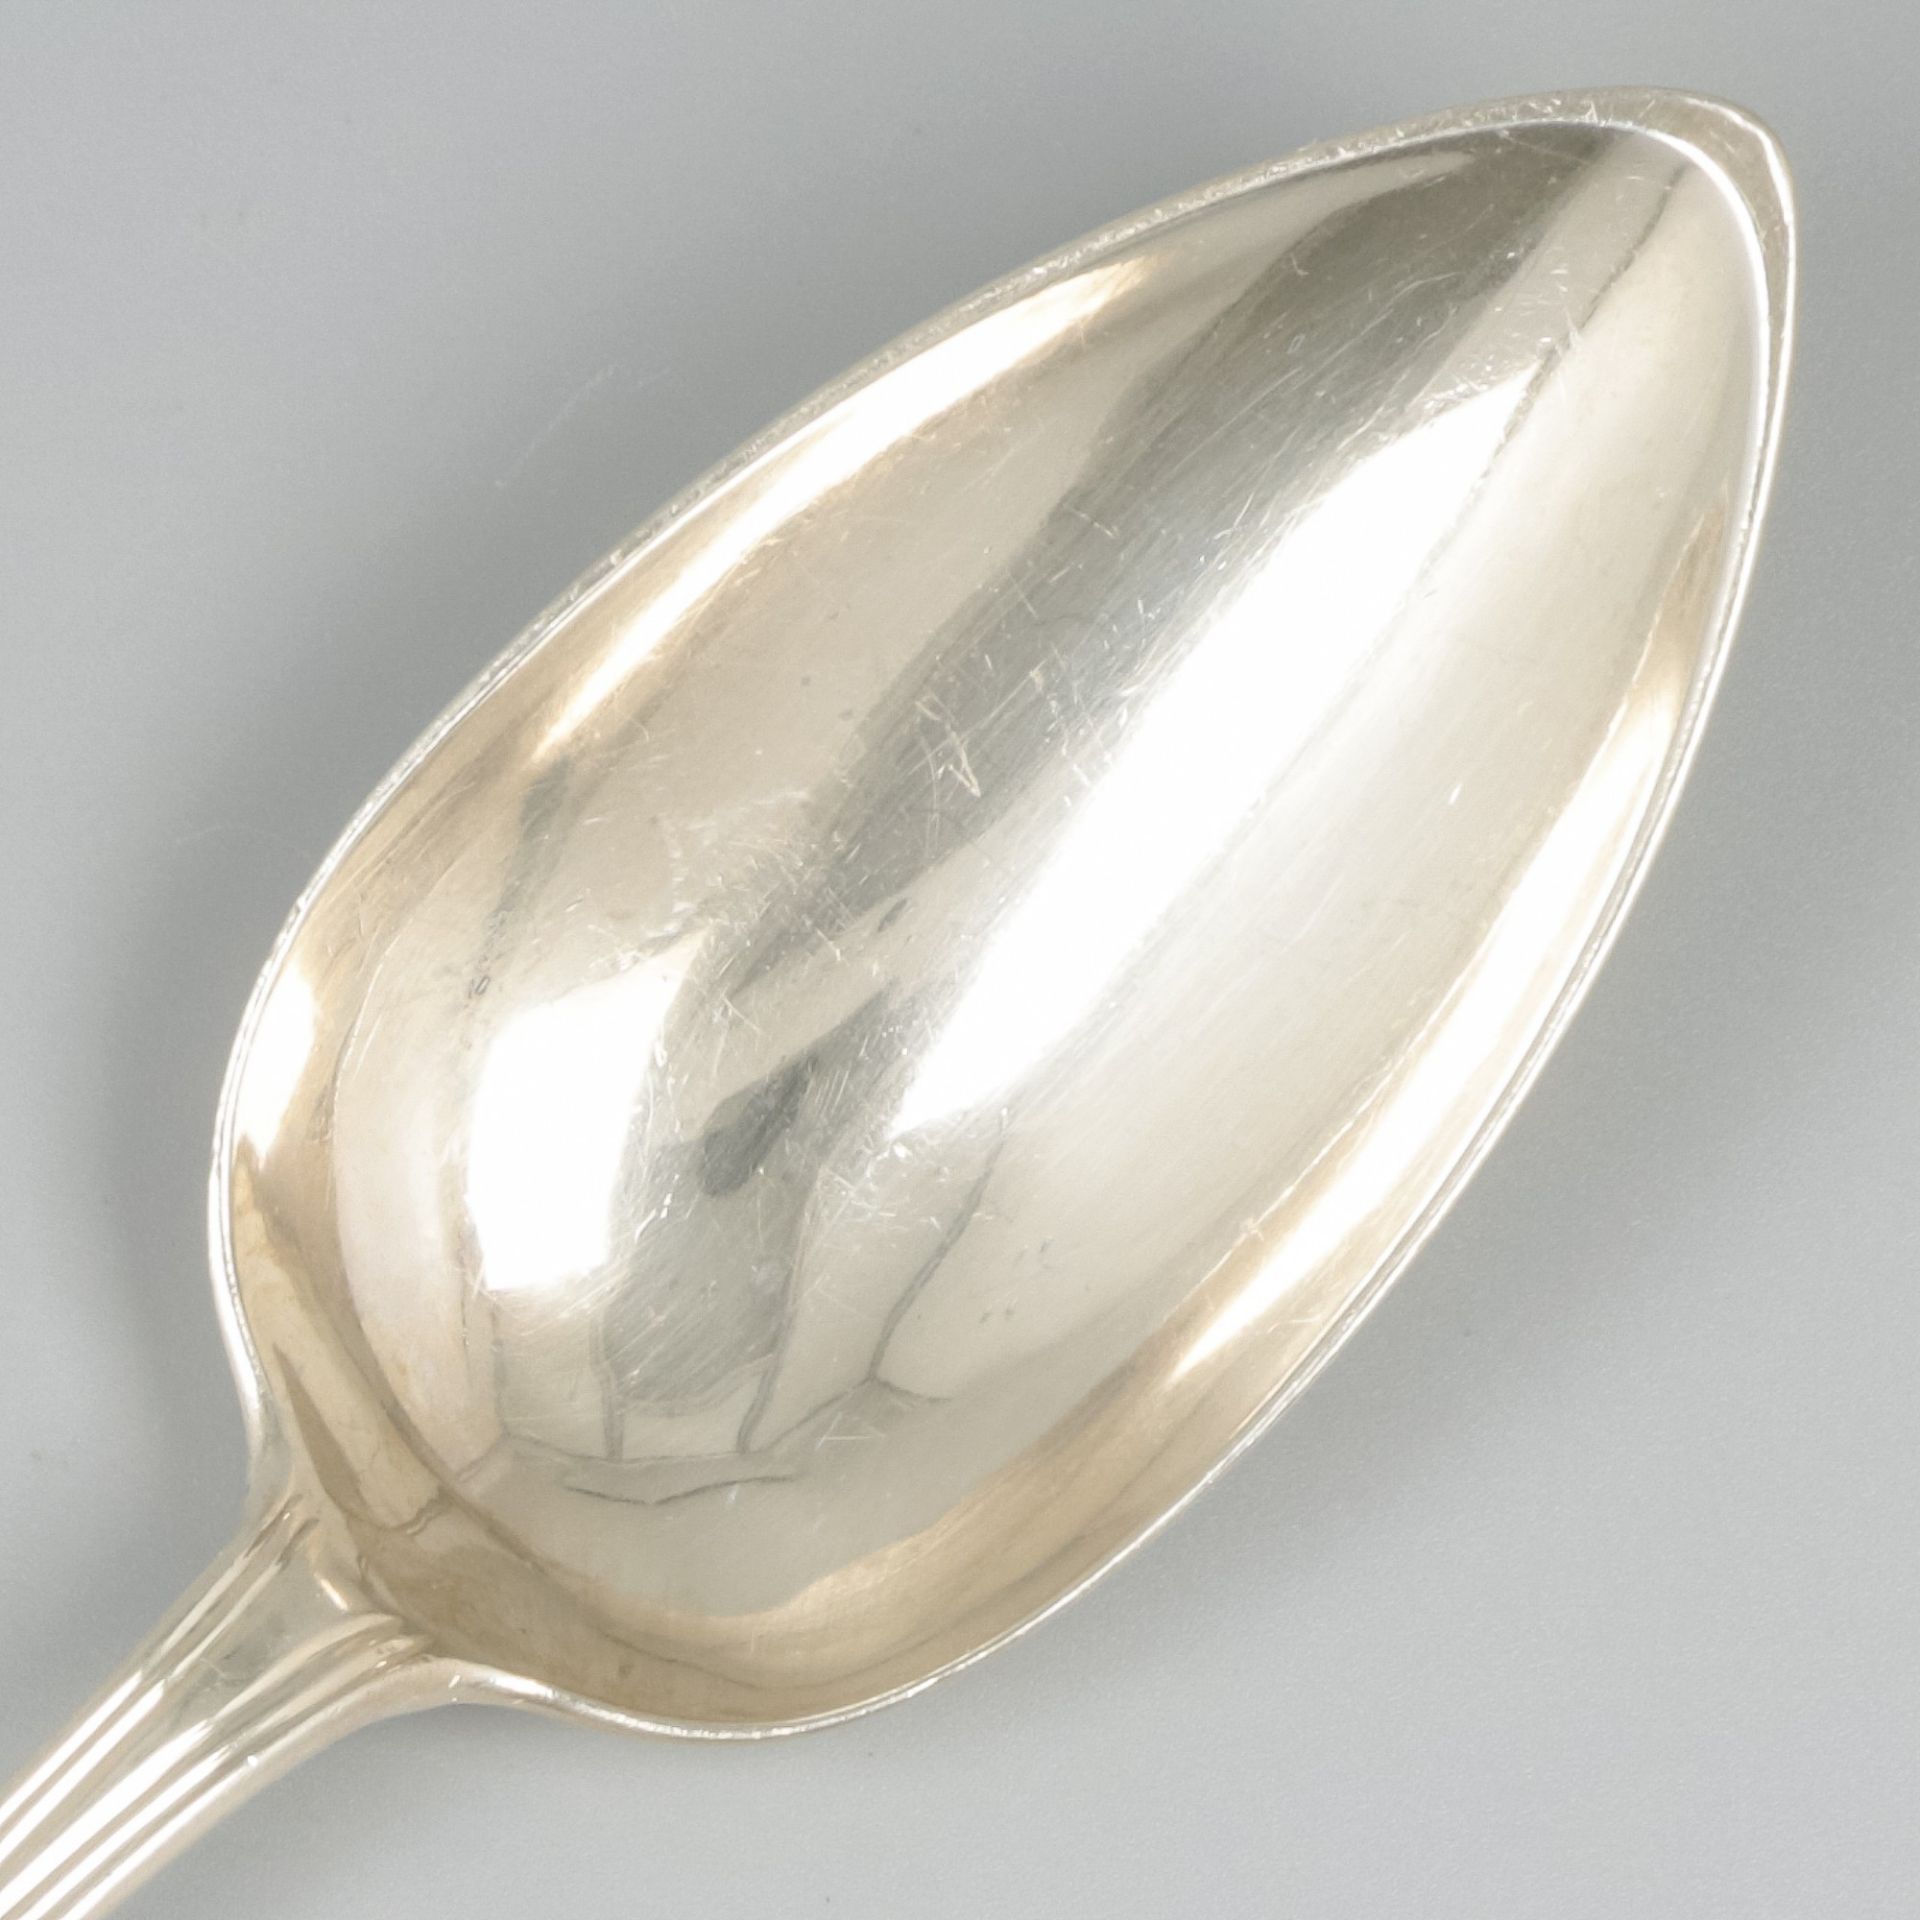 Vegetable serving spoon "Hollands Rondfilet",  silver. - Image 4 of 6